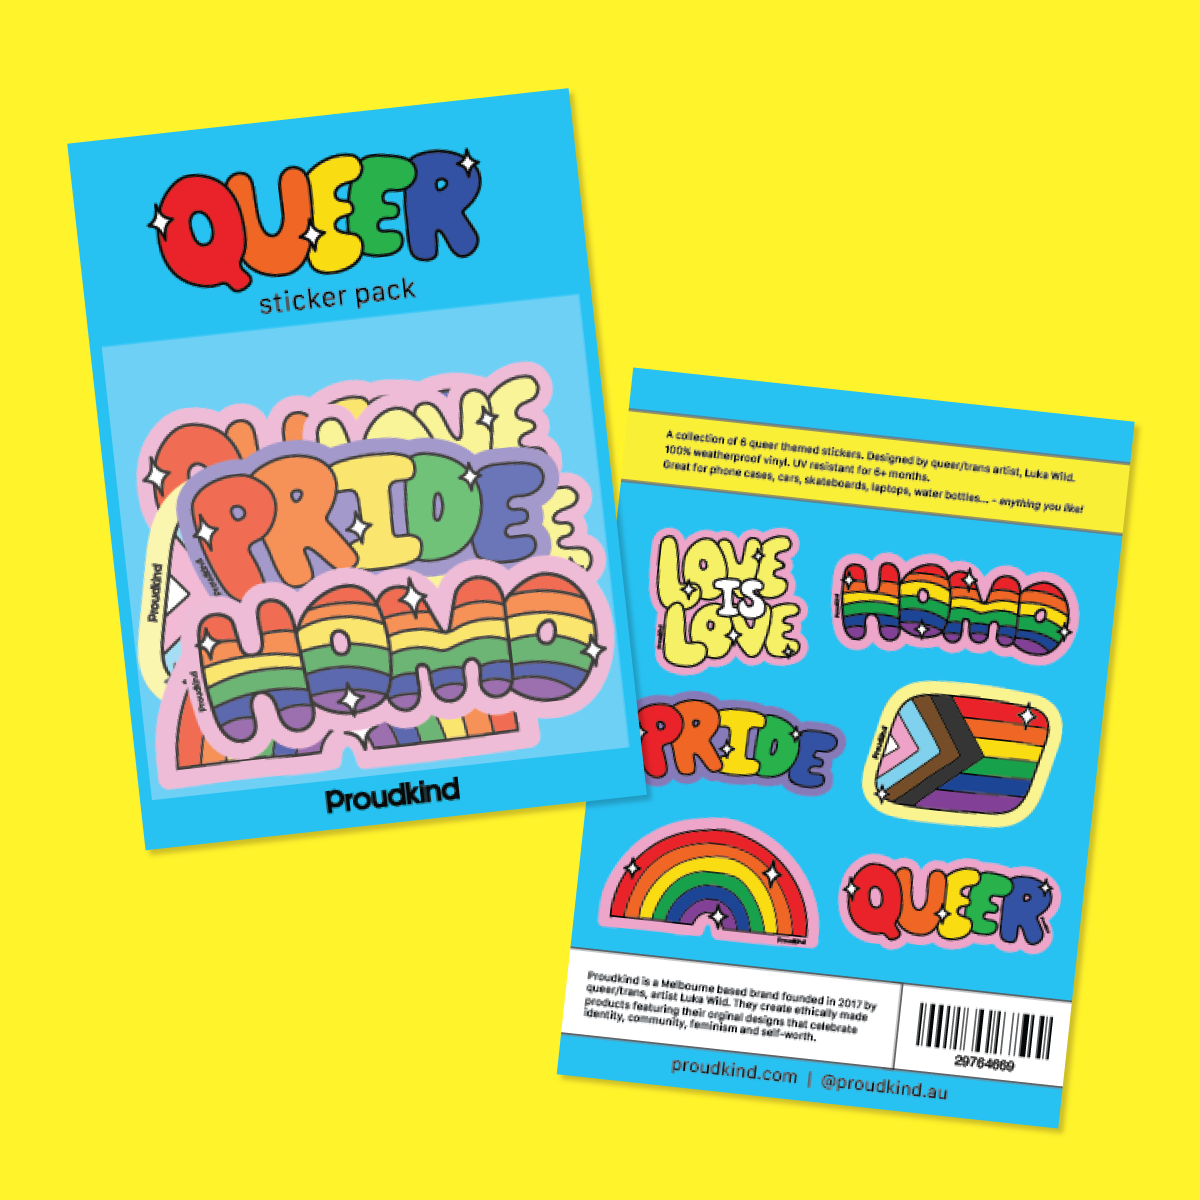 Queer Sticker Pack – Proudkind